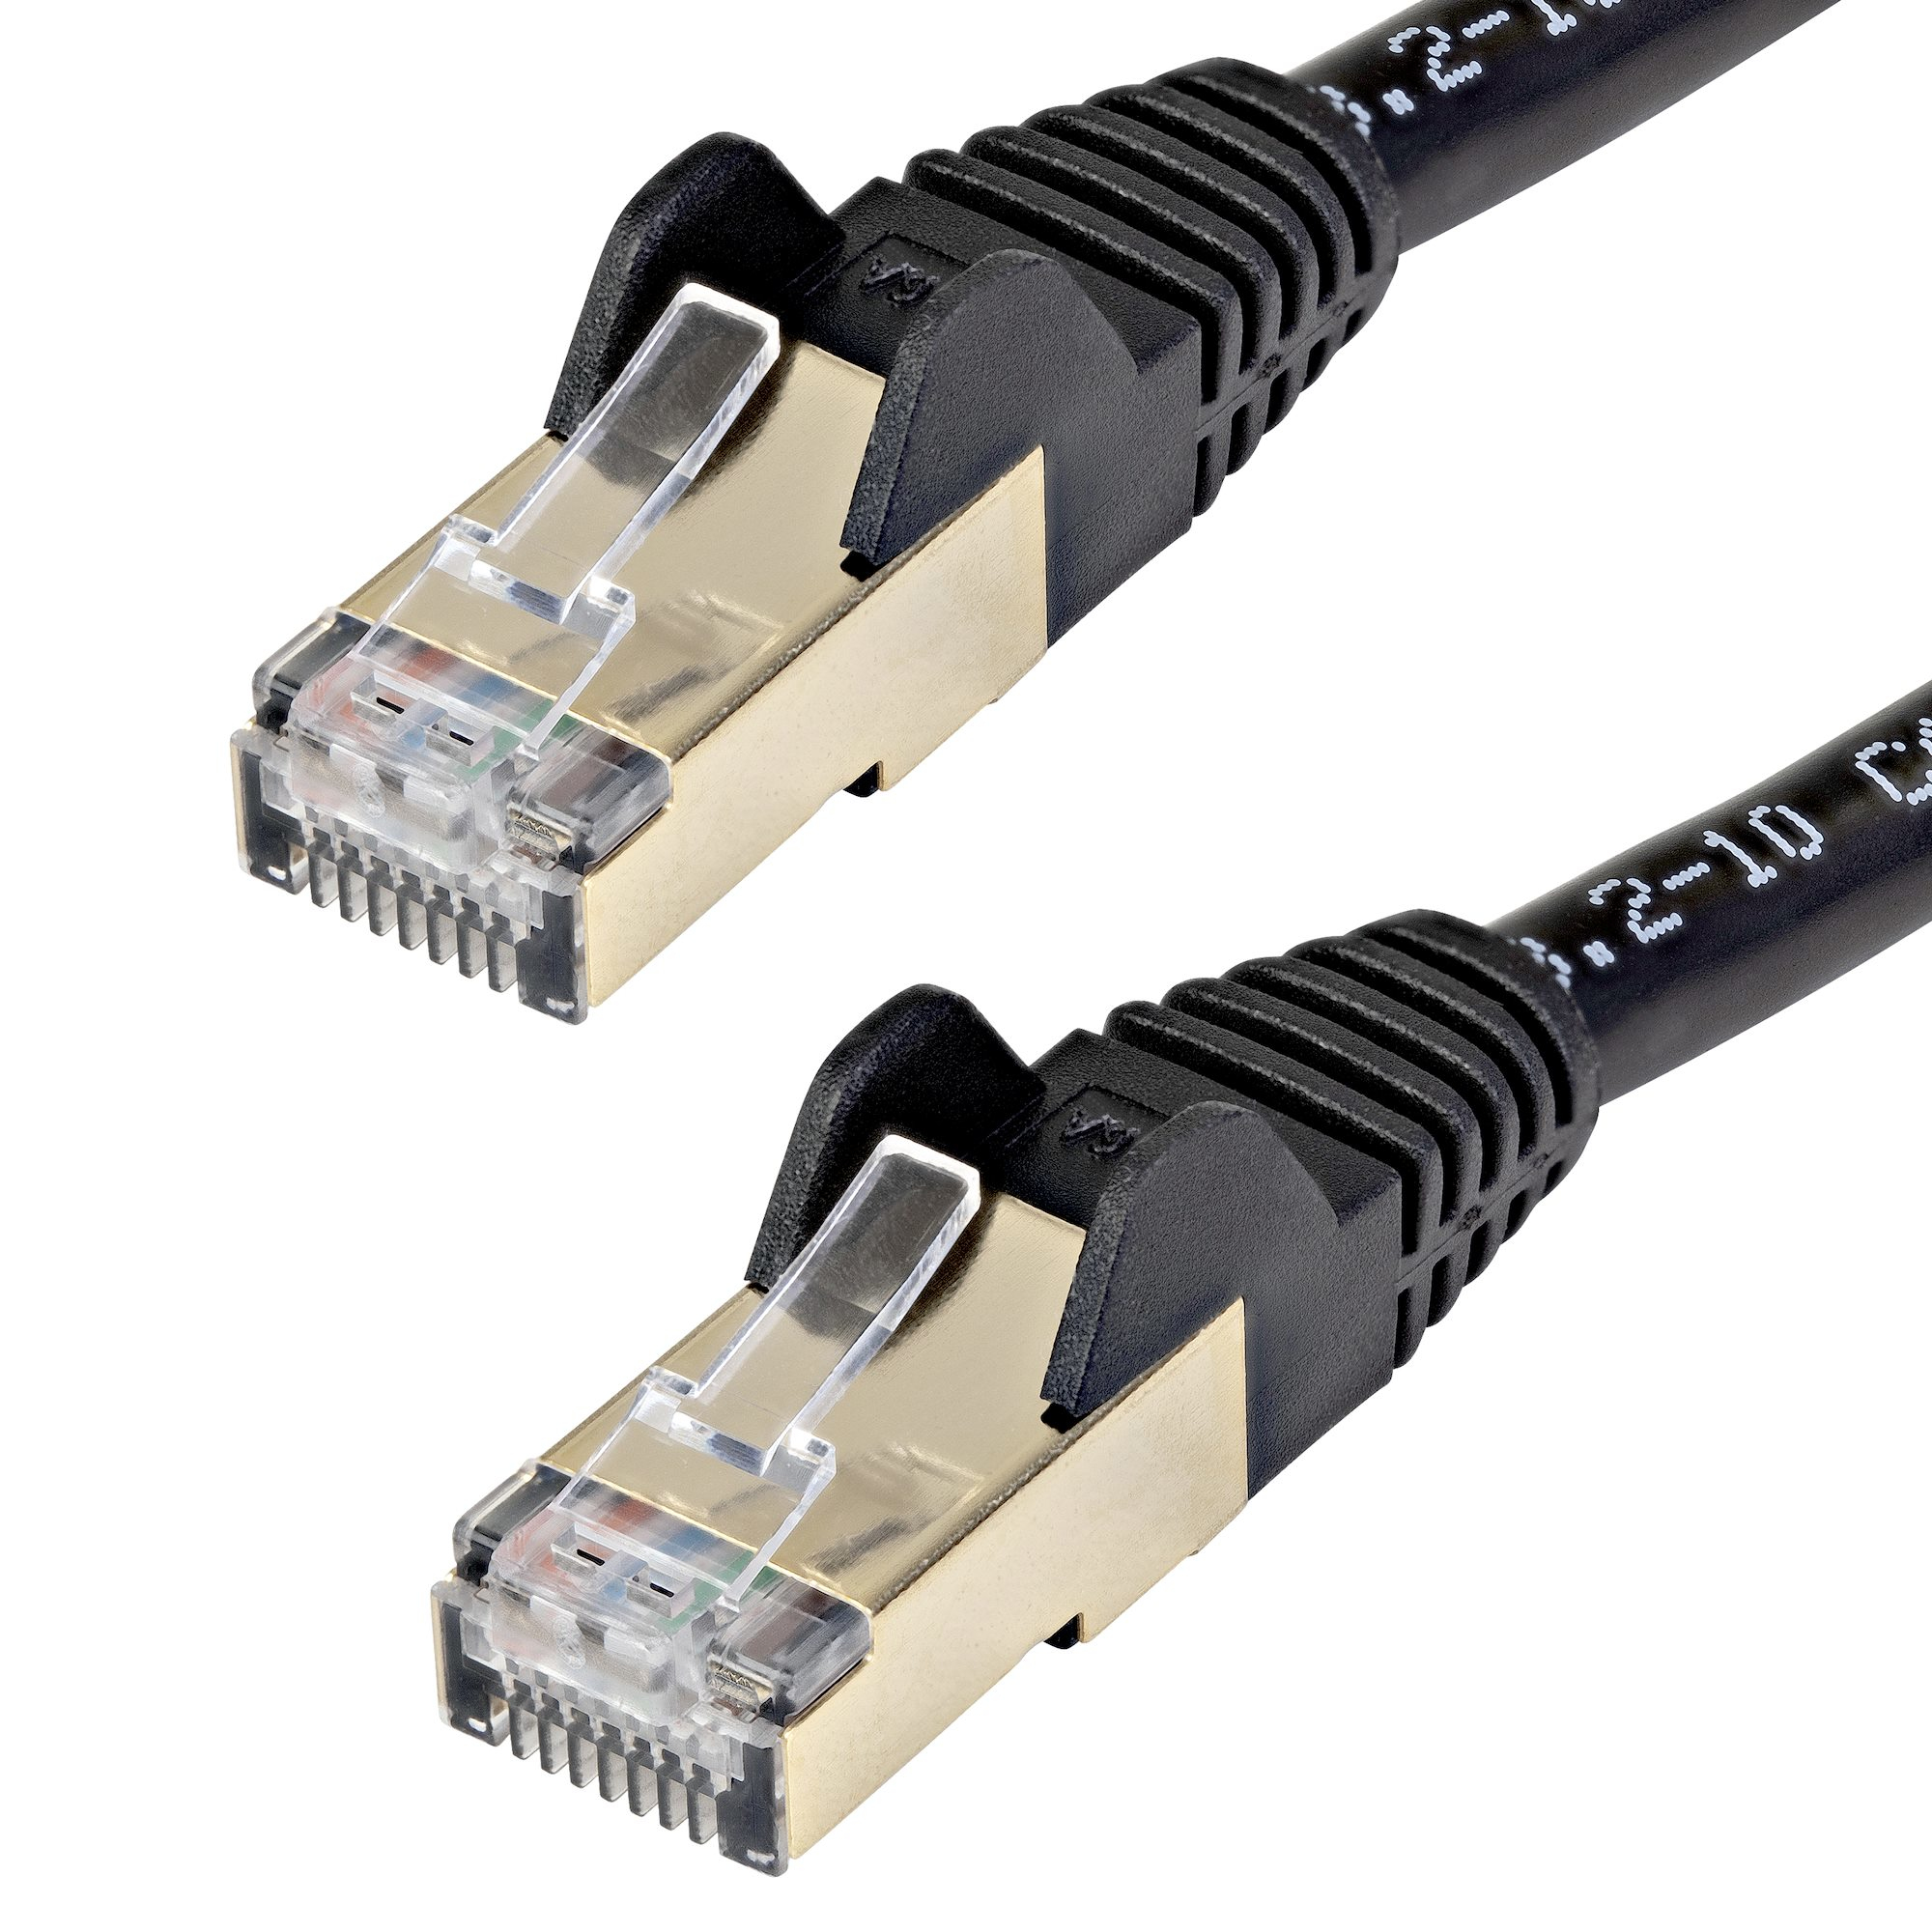 StarTech.com 10m CAT6A Ethernet Cable, 10 Gigabit Shielded Snagless RJ45 100W PoE Patch Cord, CAT 6A 10GbE STP Network Cable w/Strain Relief, Black, Fluke Tested/UL Certified Wiring/TIA - Category 6A - 26AWG (6ASPAT10MBK)